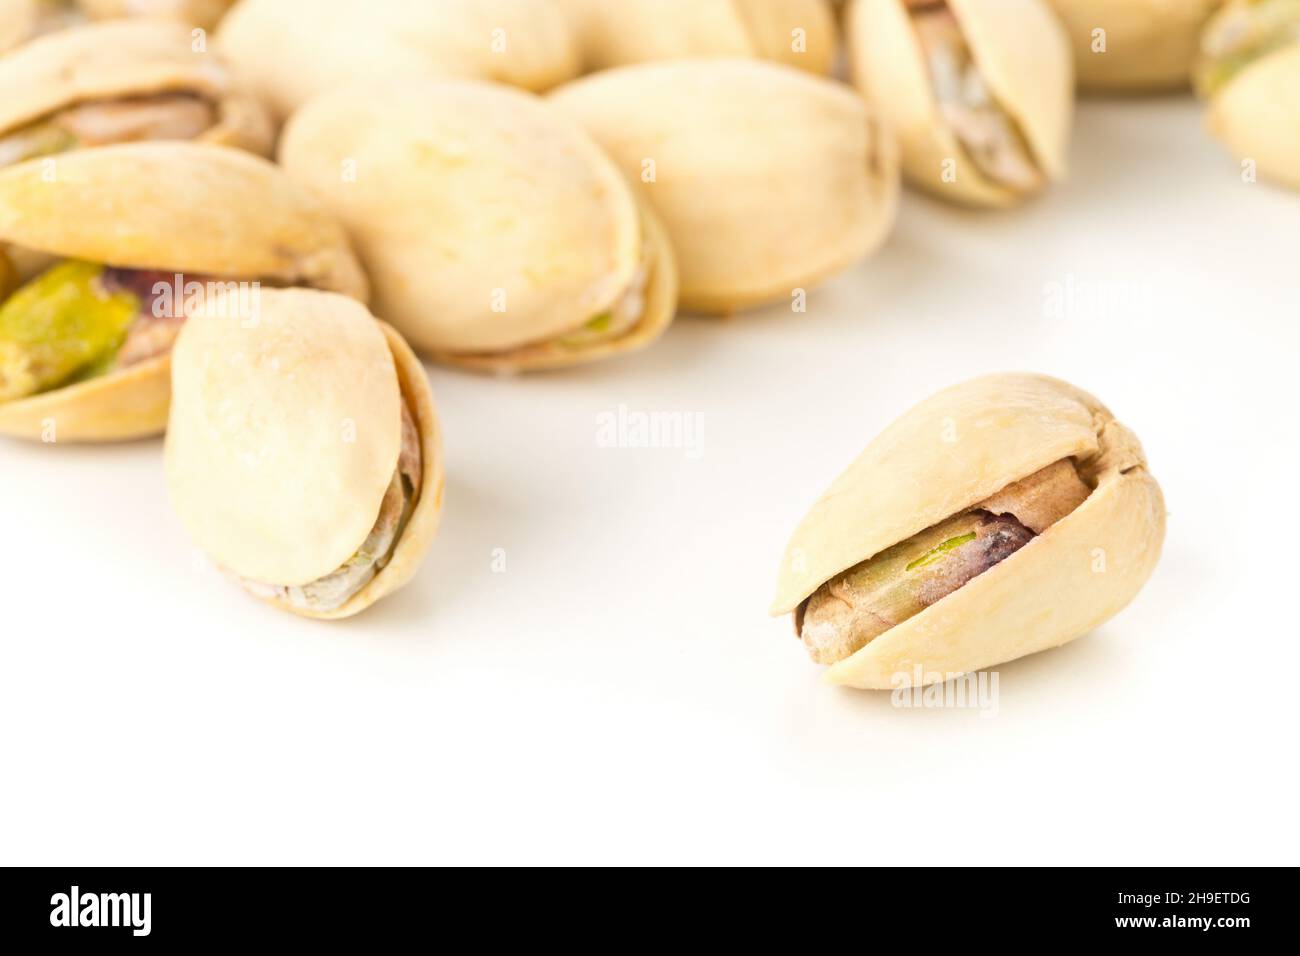 Close up of single pistachio in front of heap of salted, roasted green pistachio nuts snack over white background, healthy food snack, selective focus Stock Photo